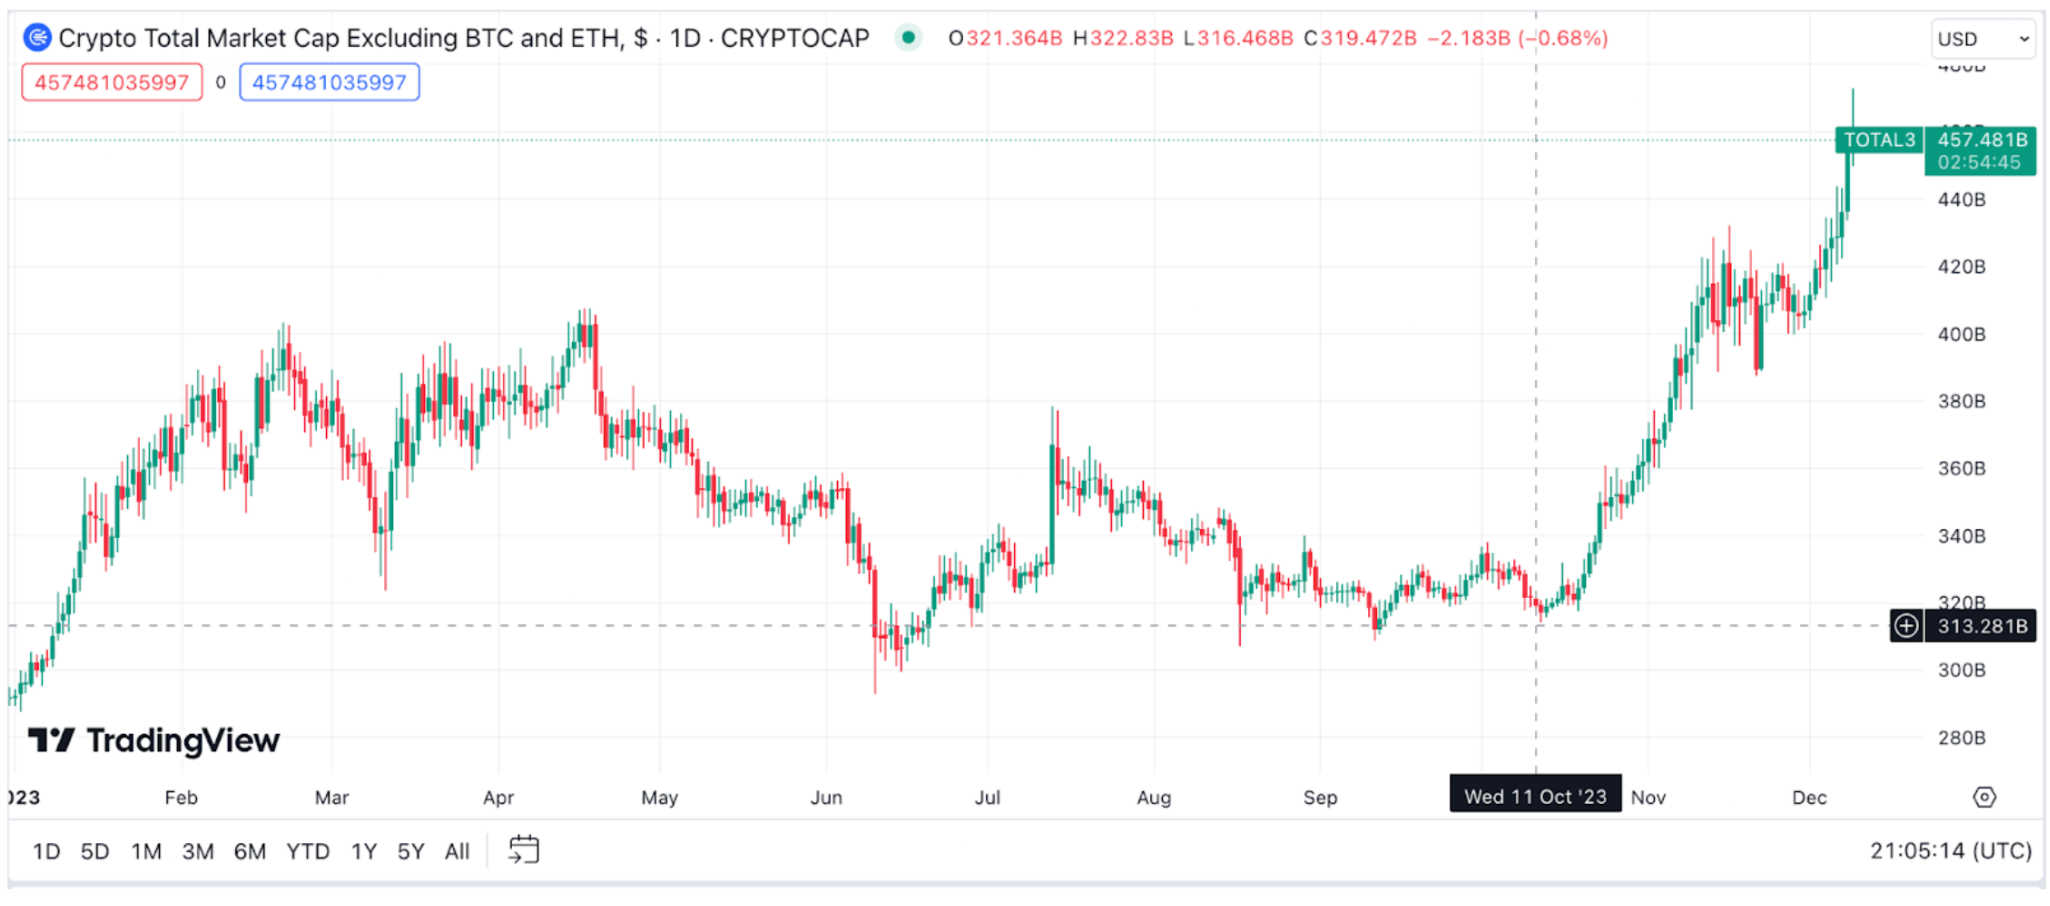 Total Crypto Market Capitalization Excluding Bitcoin (BTC) and Ethreum (ETH) - Source: TradingView